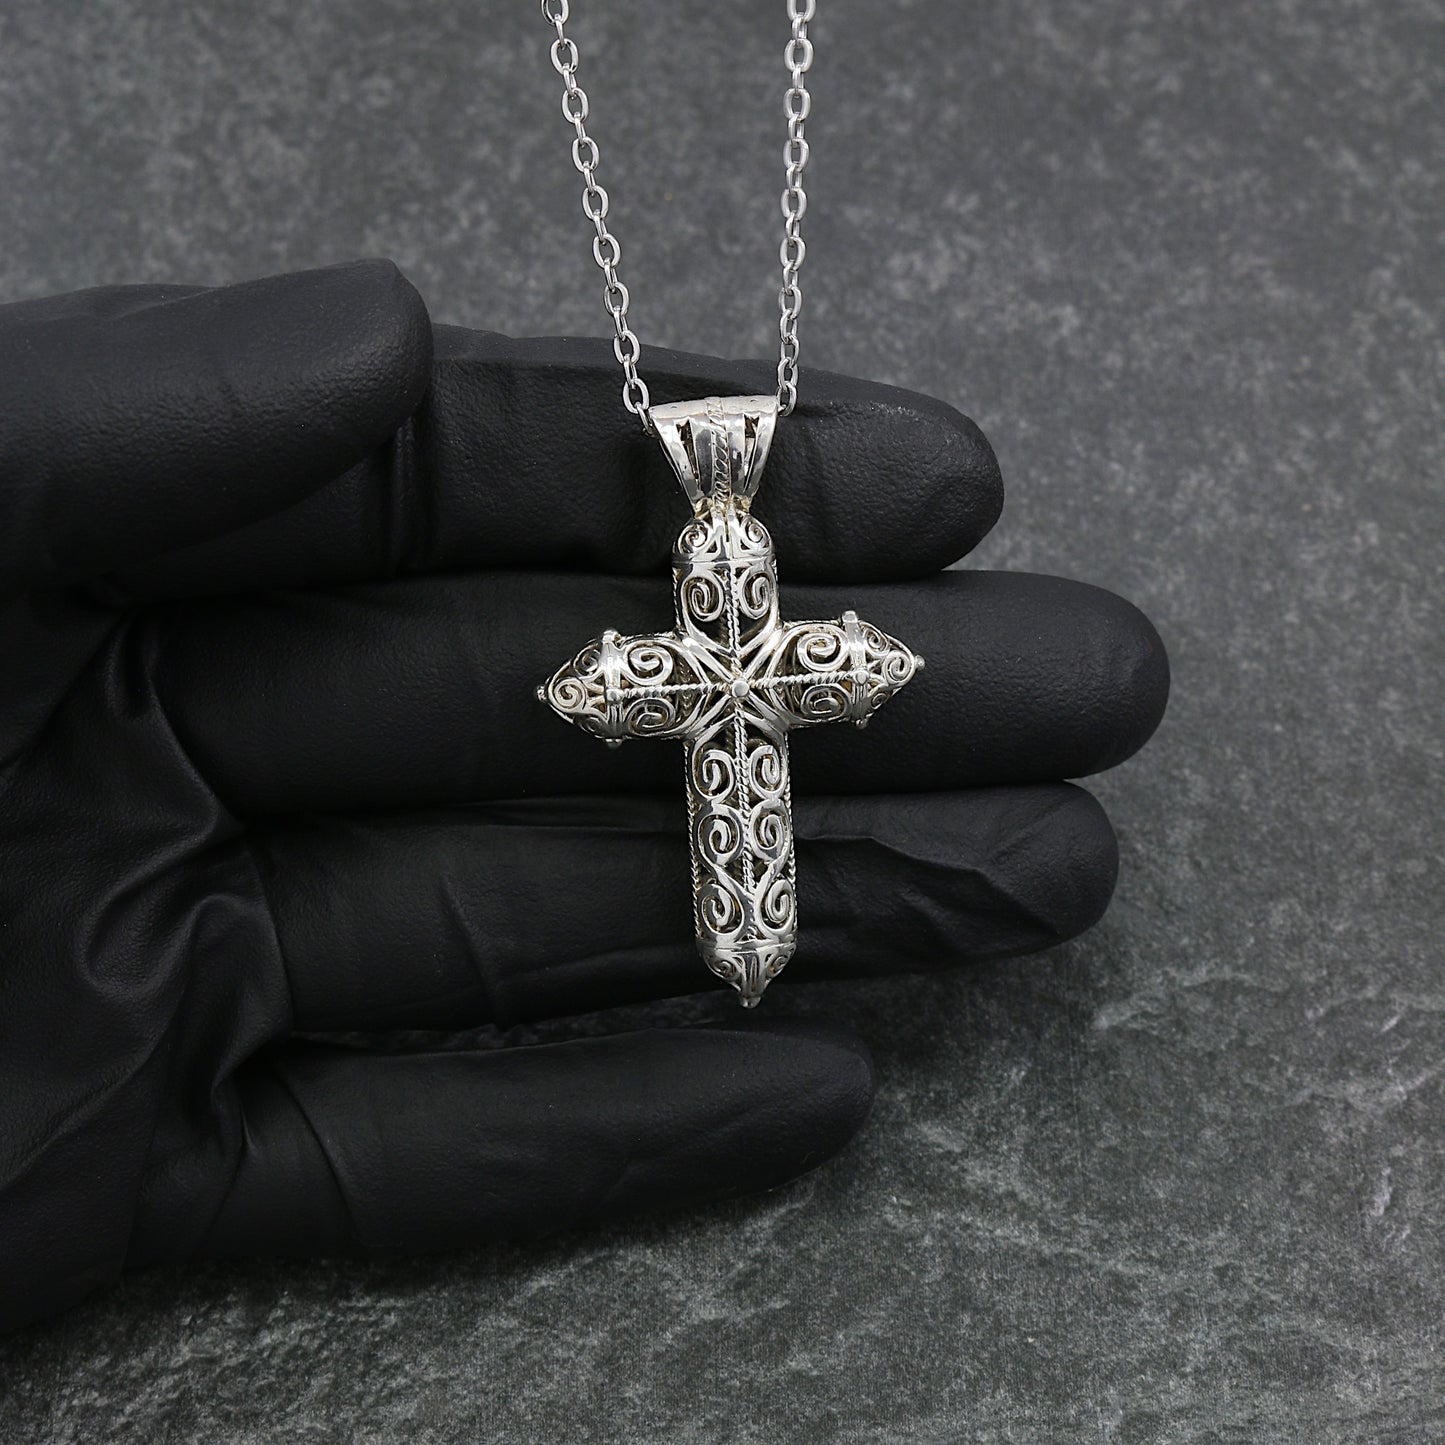 925 Sterling Silver High Scroll Cross Pendant With 22" Hypoallergenic Cable Chain Necklace